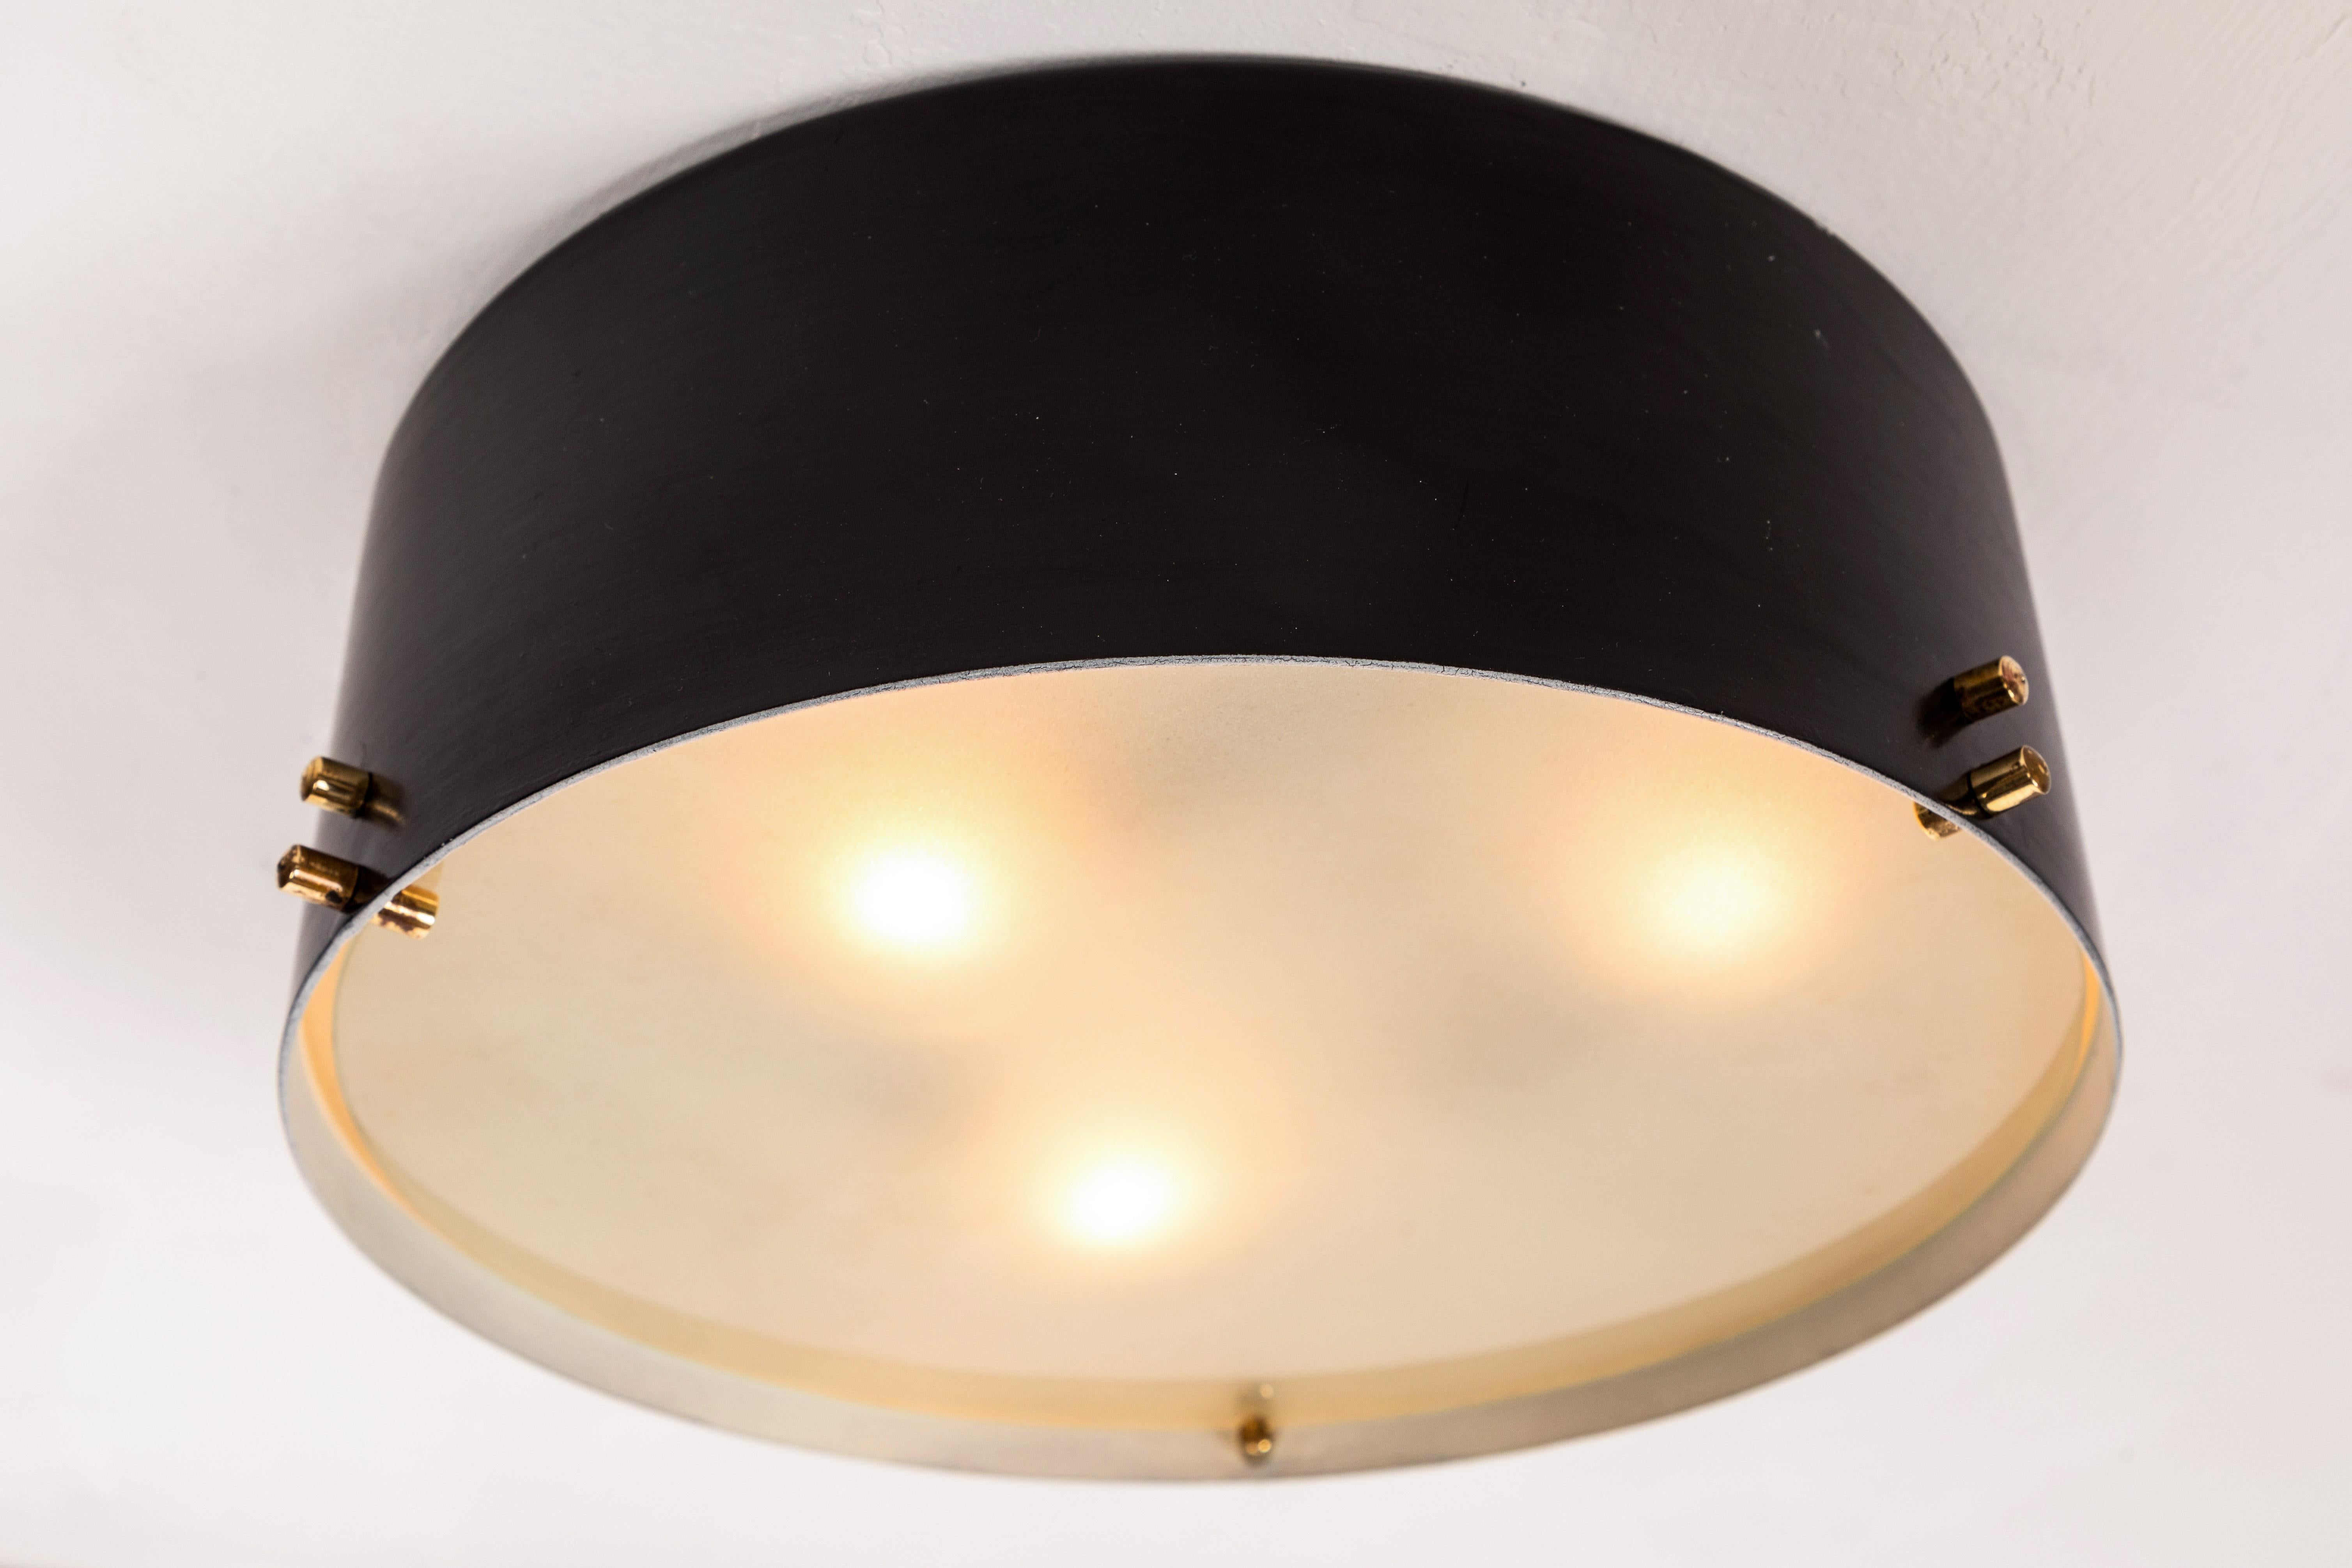 1960s Italian black and glass flush mount in the manner of Bruno Gatta. Executed in black painted metal with opaline glass and brass hardware. A sculptural and refined design characteristic of 1960s Italian design at its highest